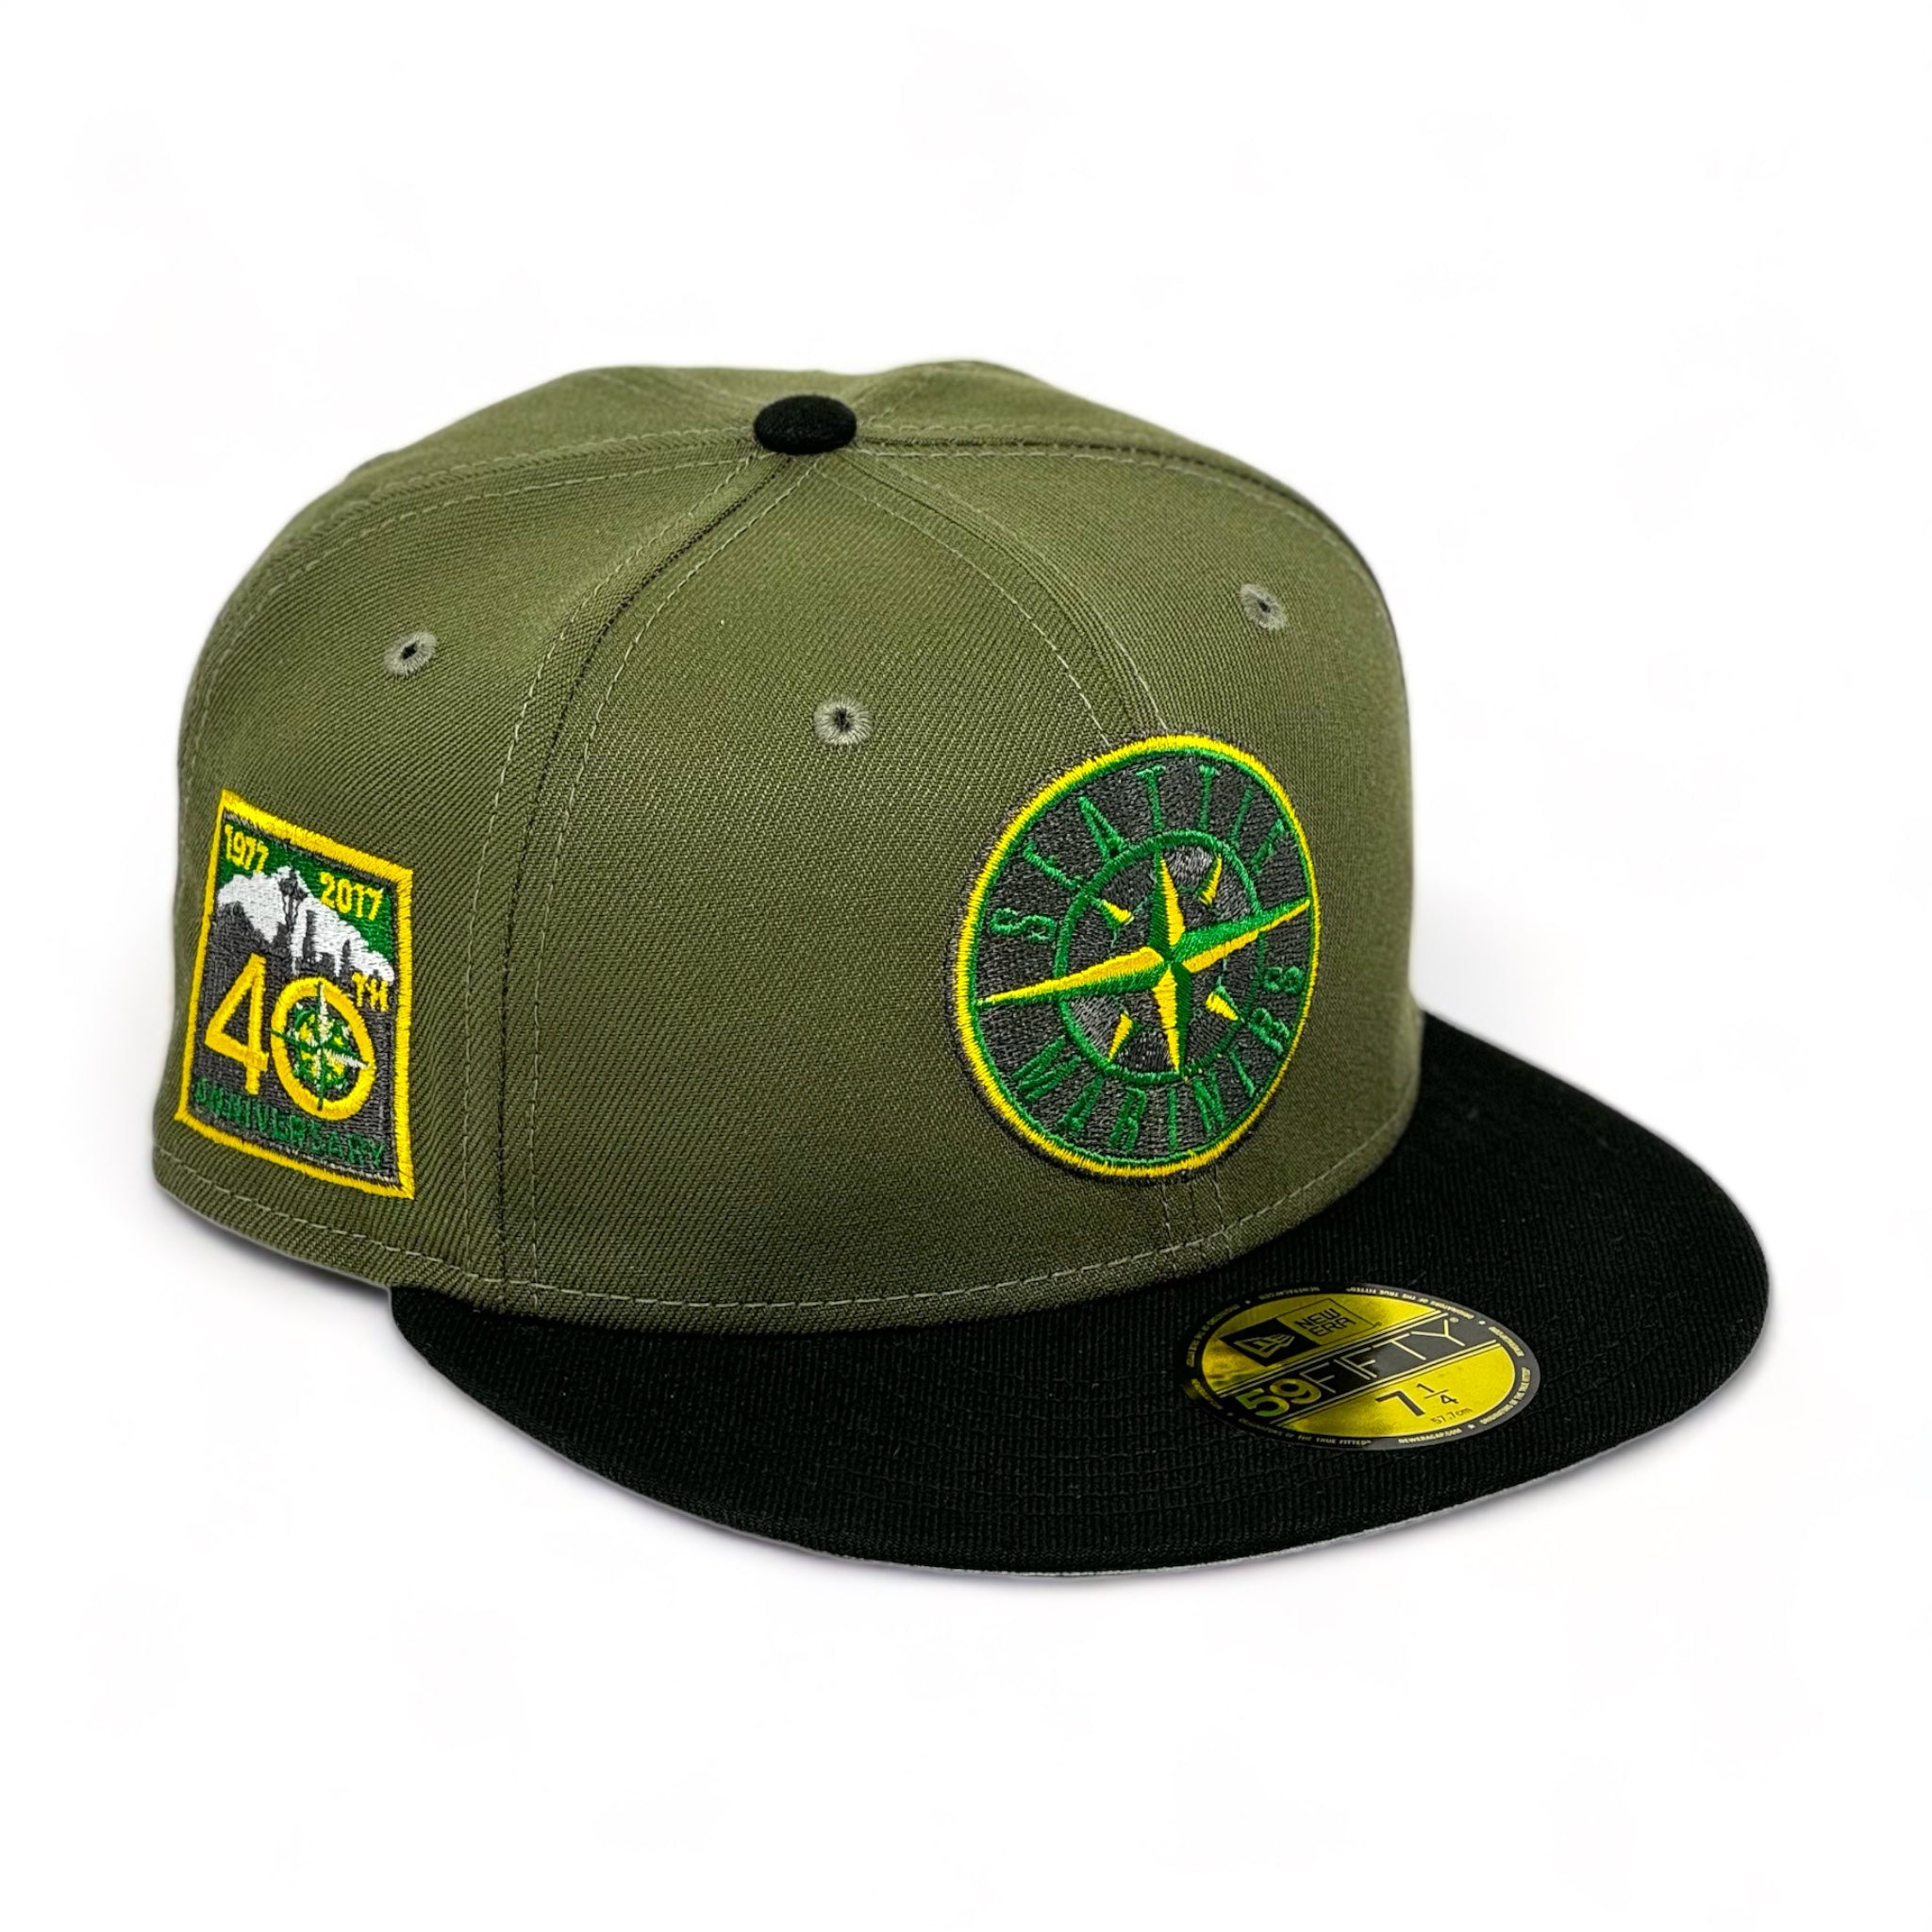 SEATTLE MARINERS (OLIVE) (40TH ANN) NEW ERA 59FIFTY FITTED